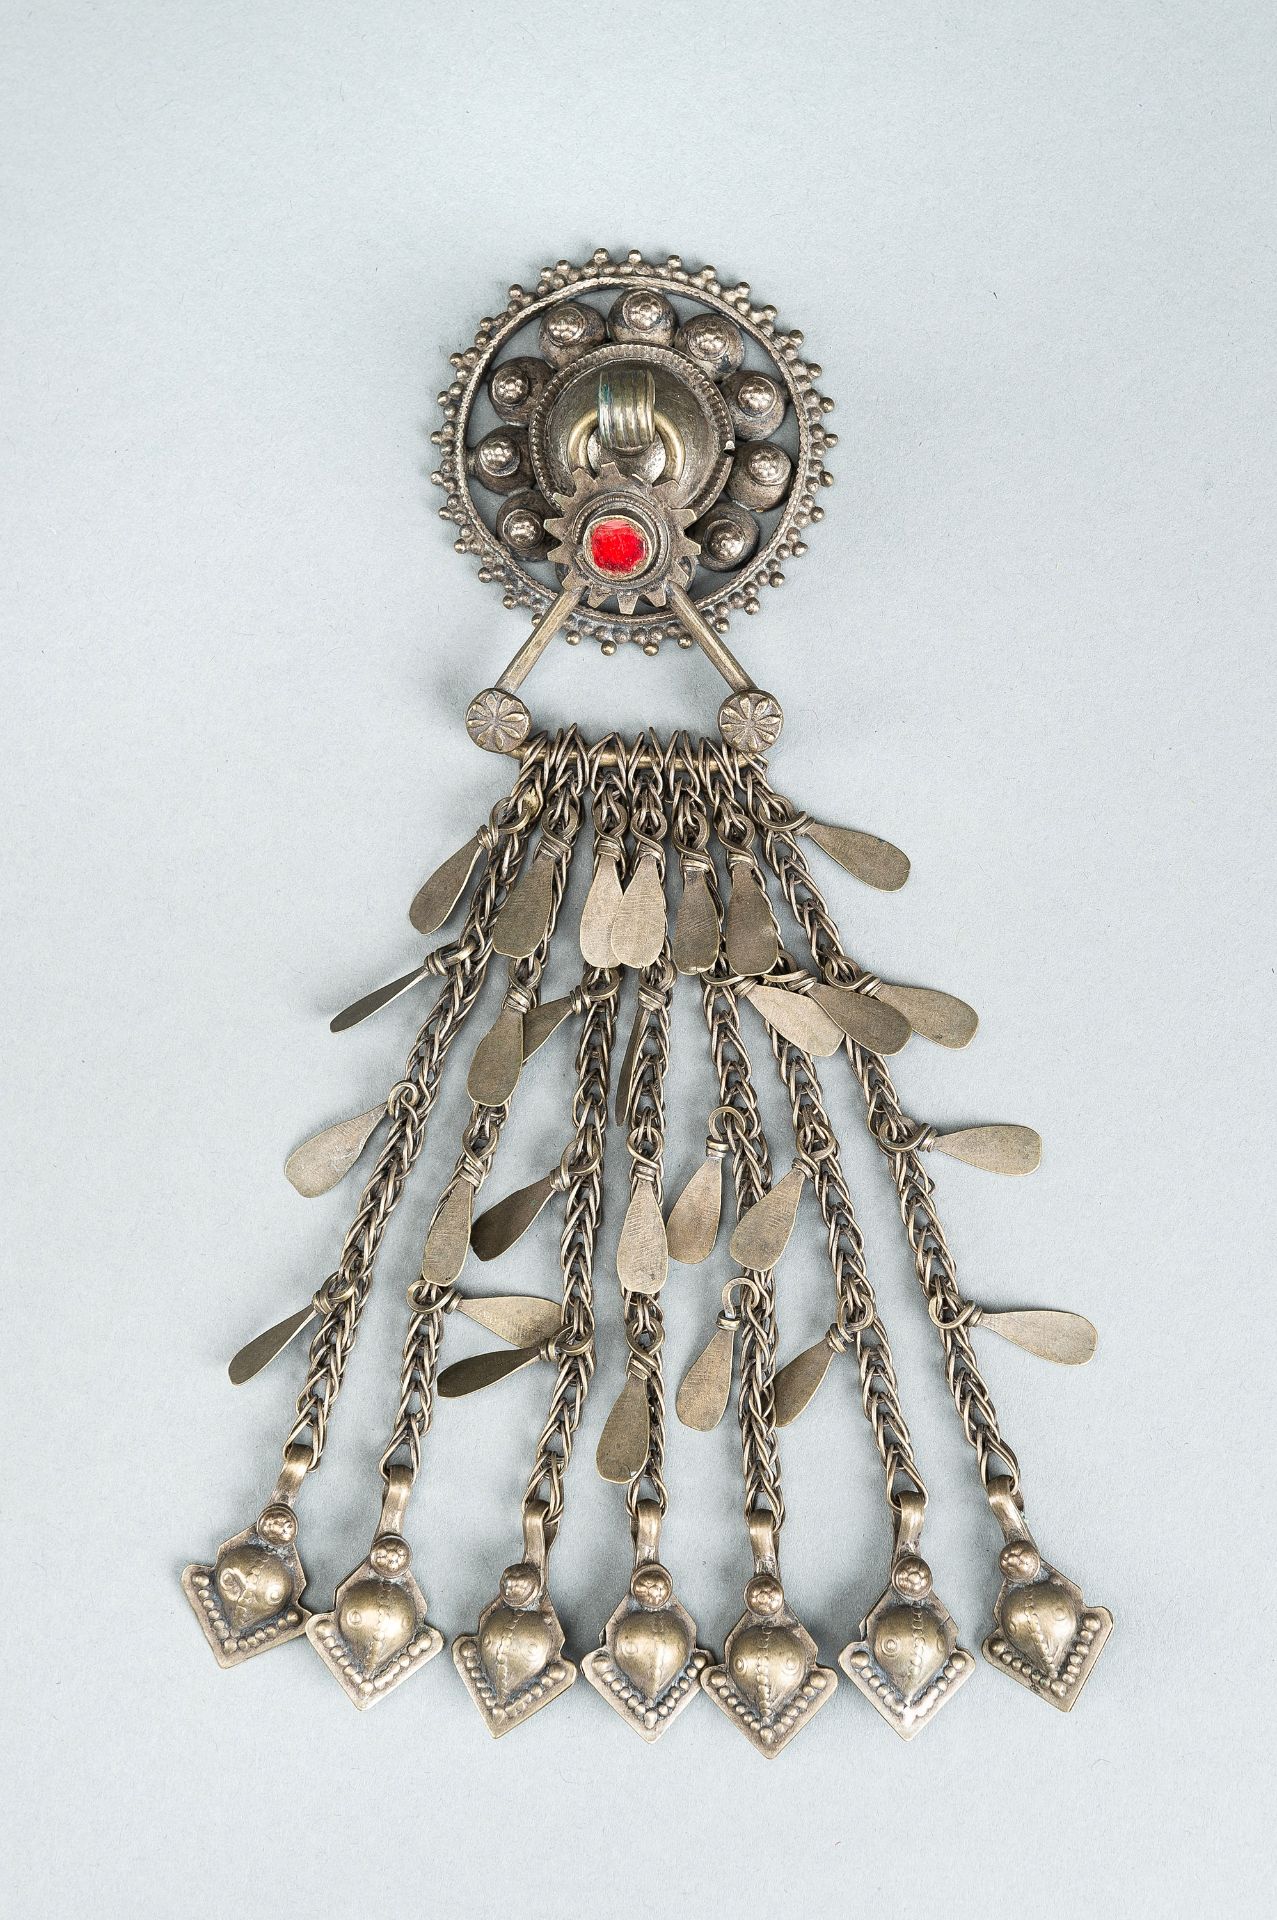 THREE TRIBAL AFGHAN METAL ORNAMENTS WITH INSETS, c. 1950s - Image 2 of 16